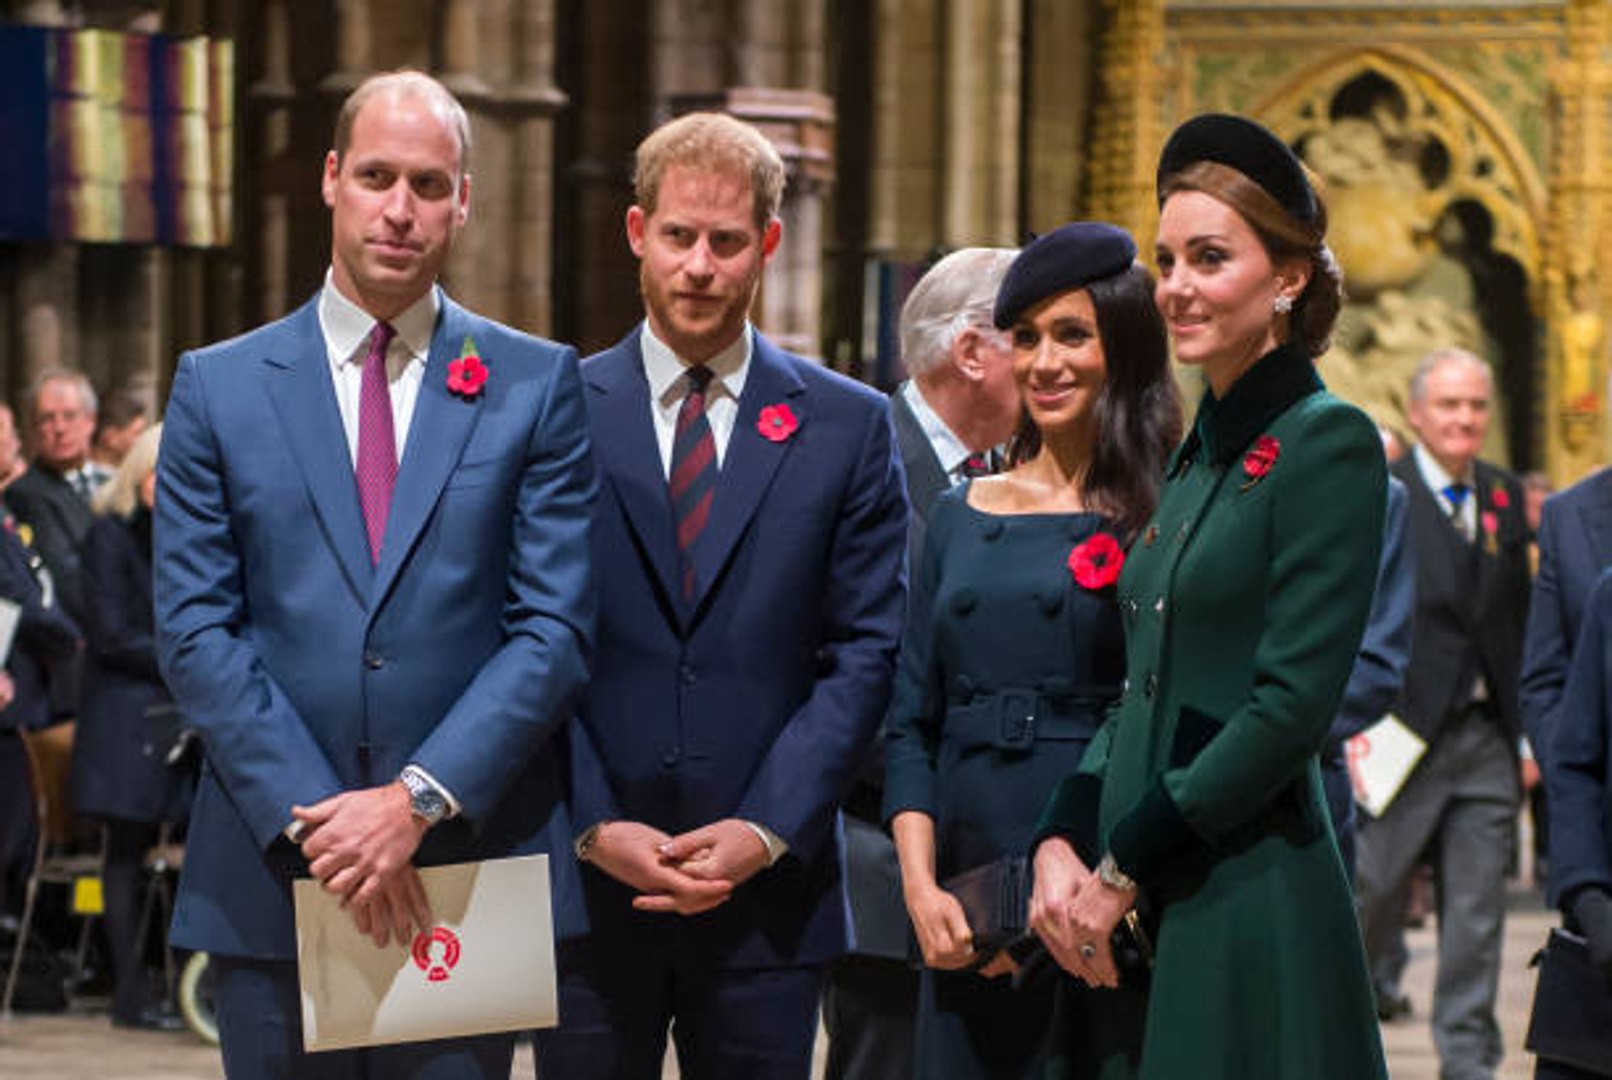 Prince William and Kate Middleton Wish Meghan Markle a Happy Birthday